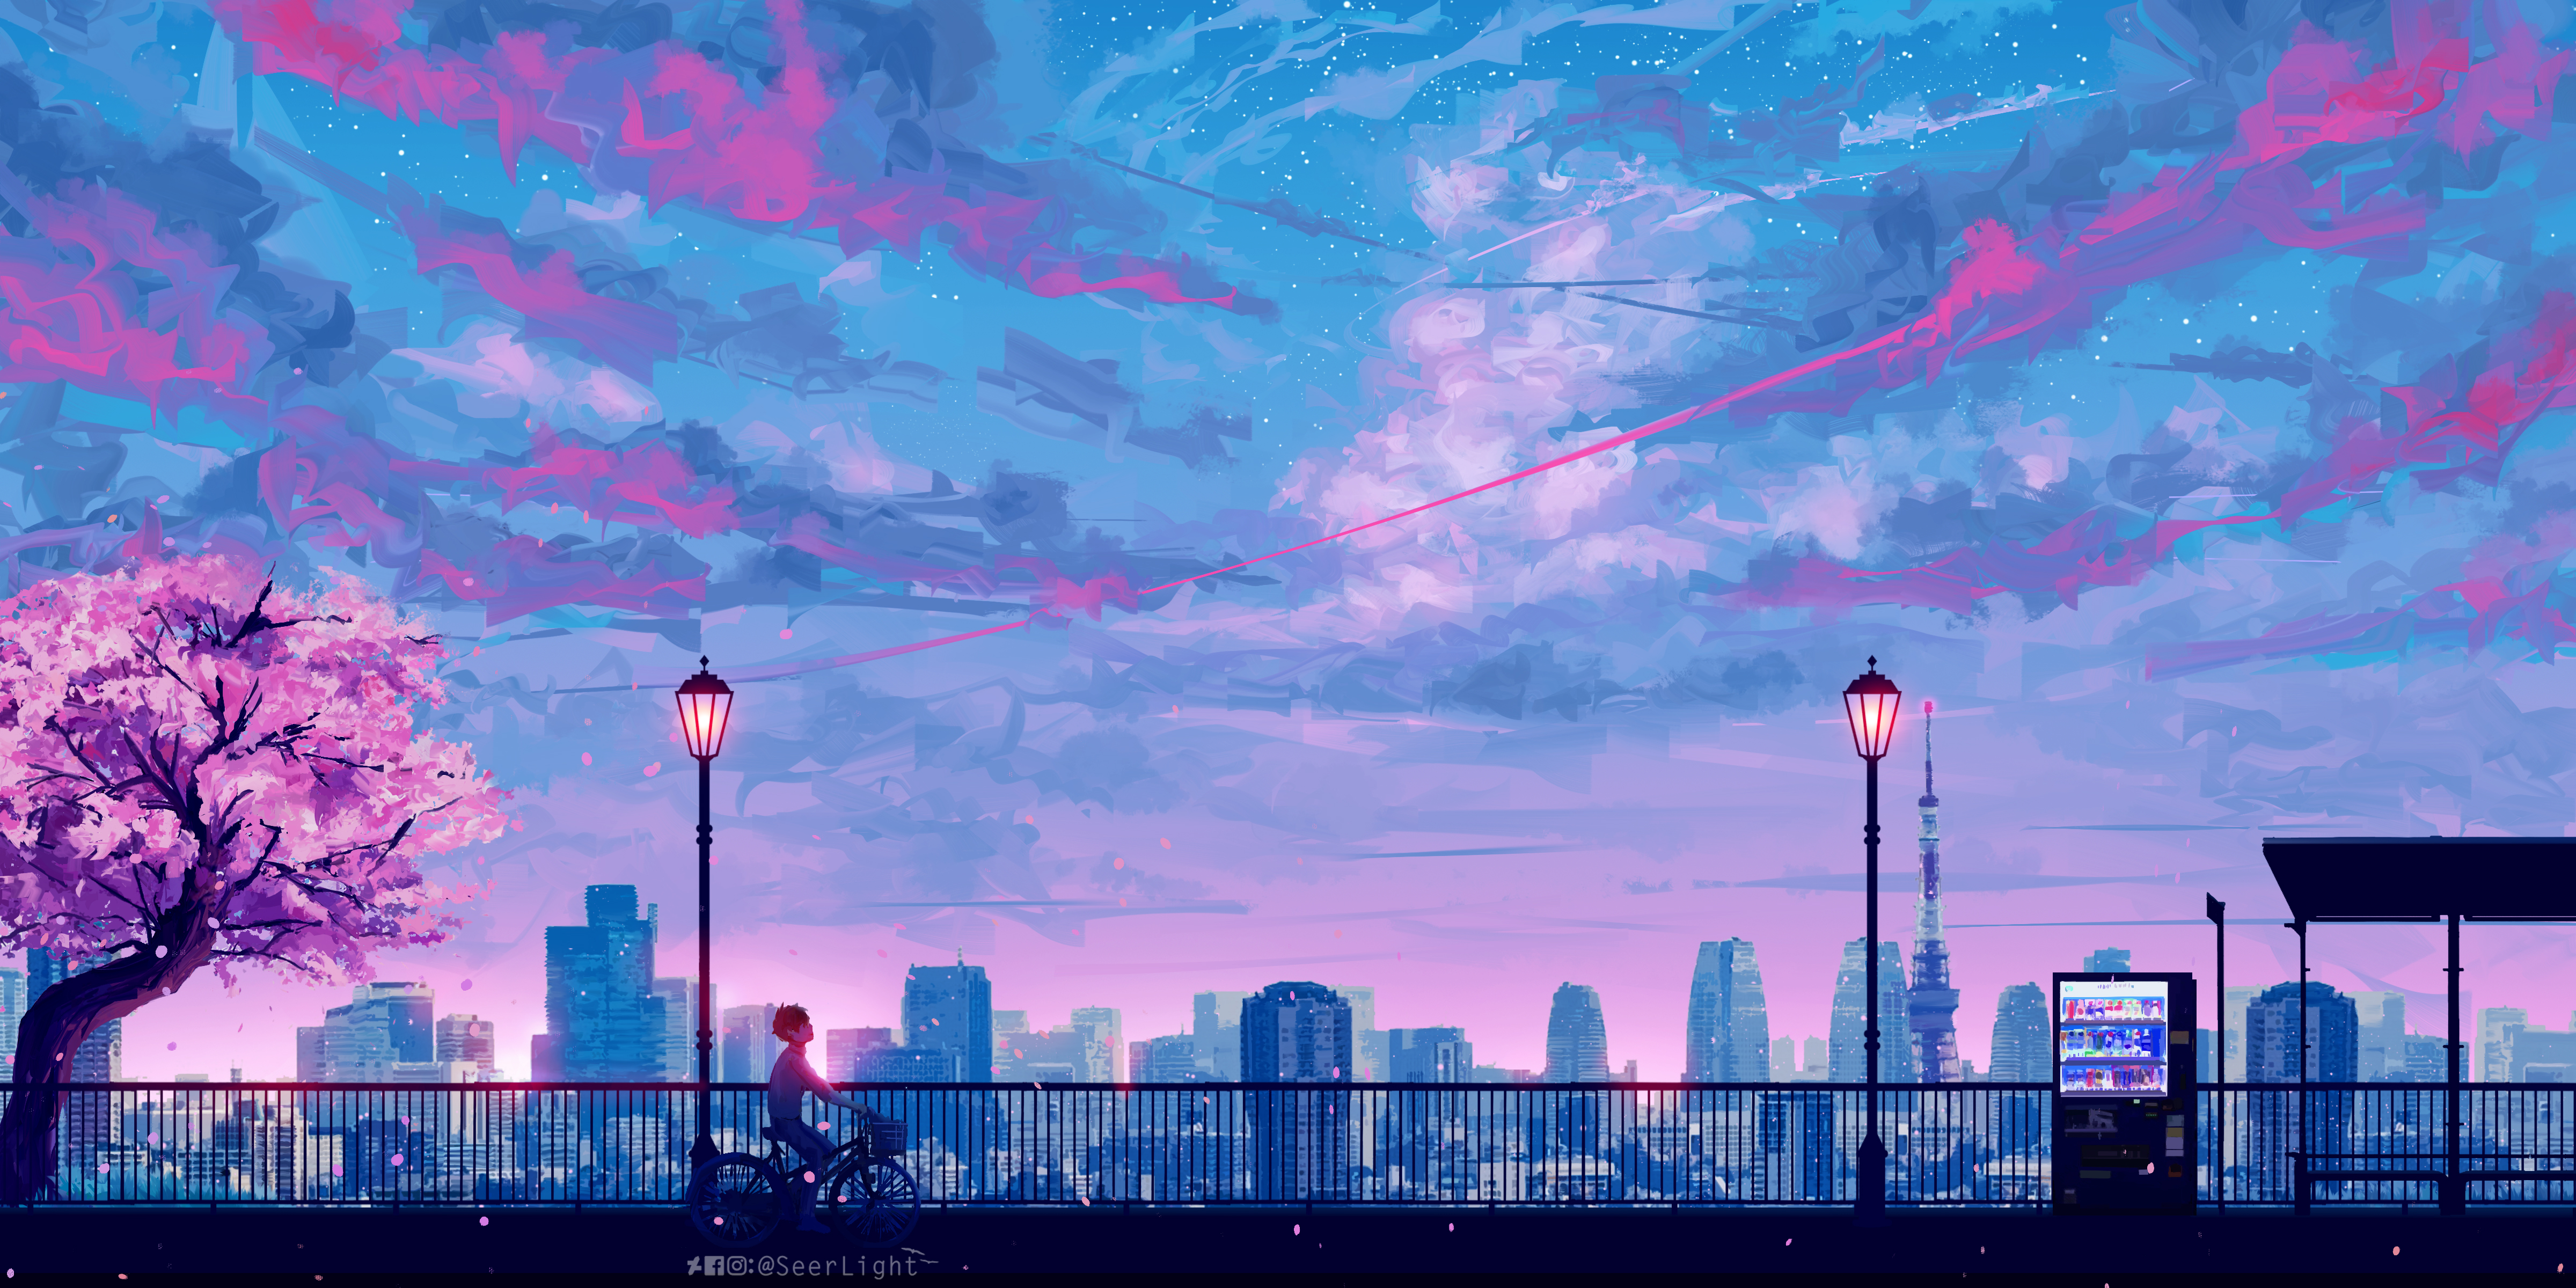 Anime Cityscape Landscape Scenery 5k Hd Anime 4k Wallpapers Images